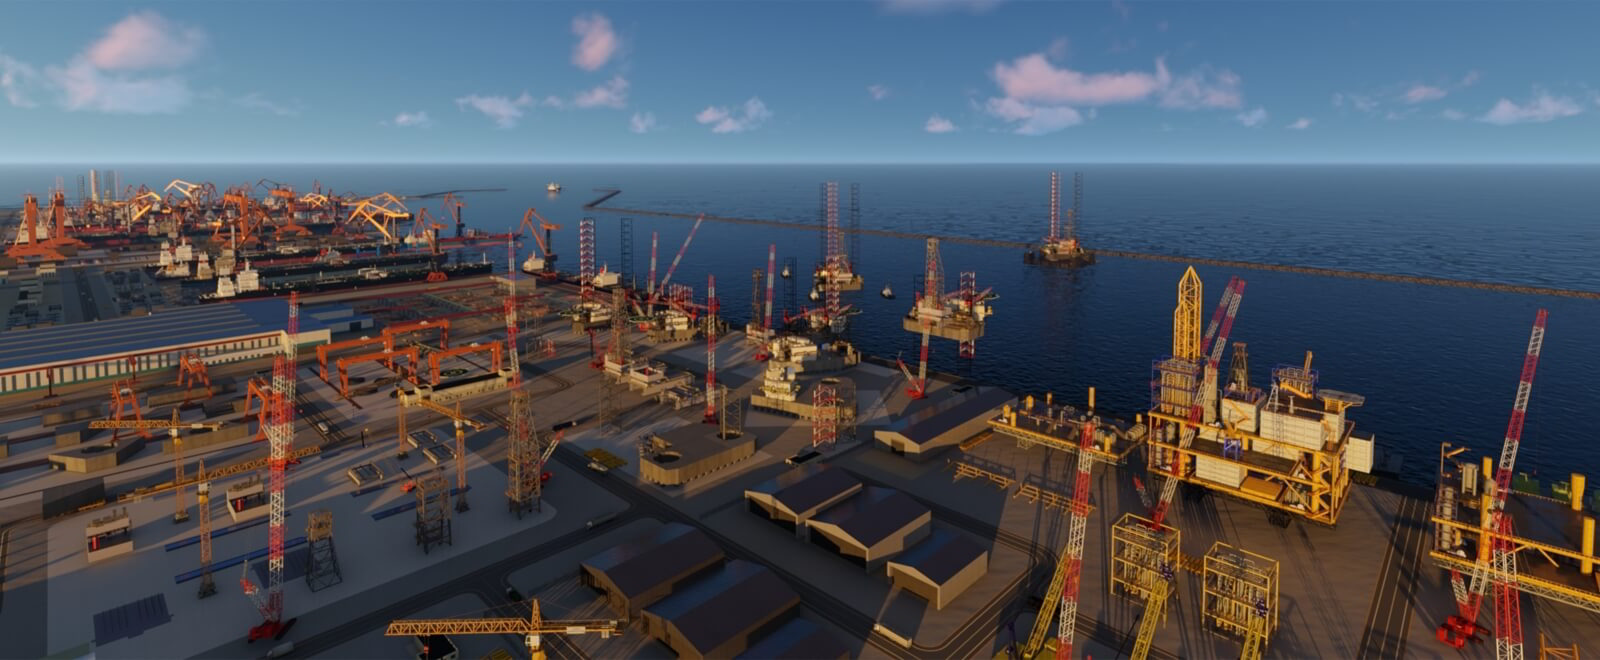 Saudi yard teams up with Keppel LeTourneau to strengthen its rig building skills and abilities